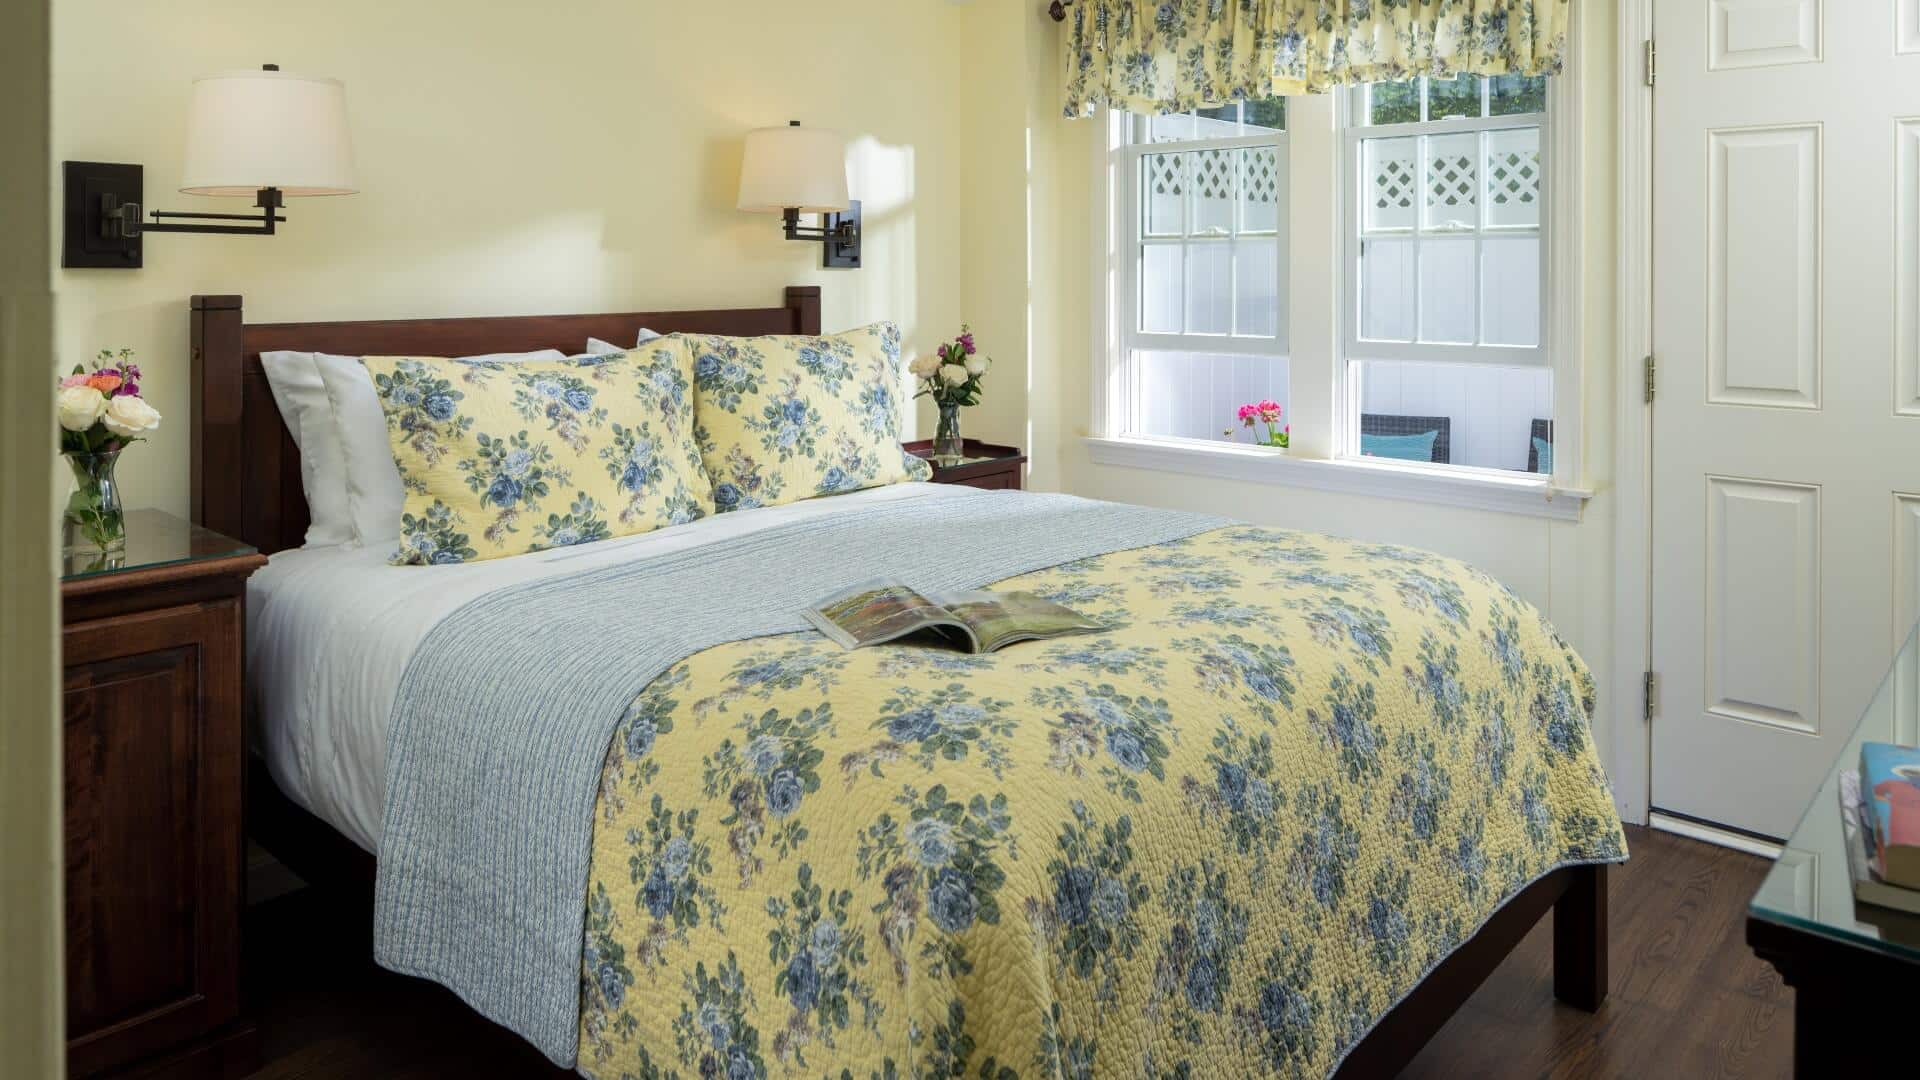 Bright bedroom with bed in floral quilt, large windows and door to private patio